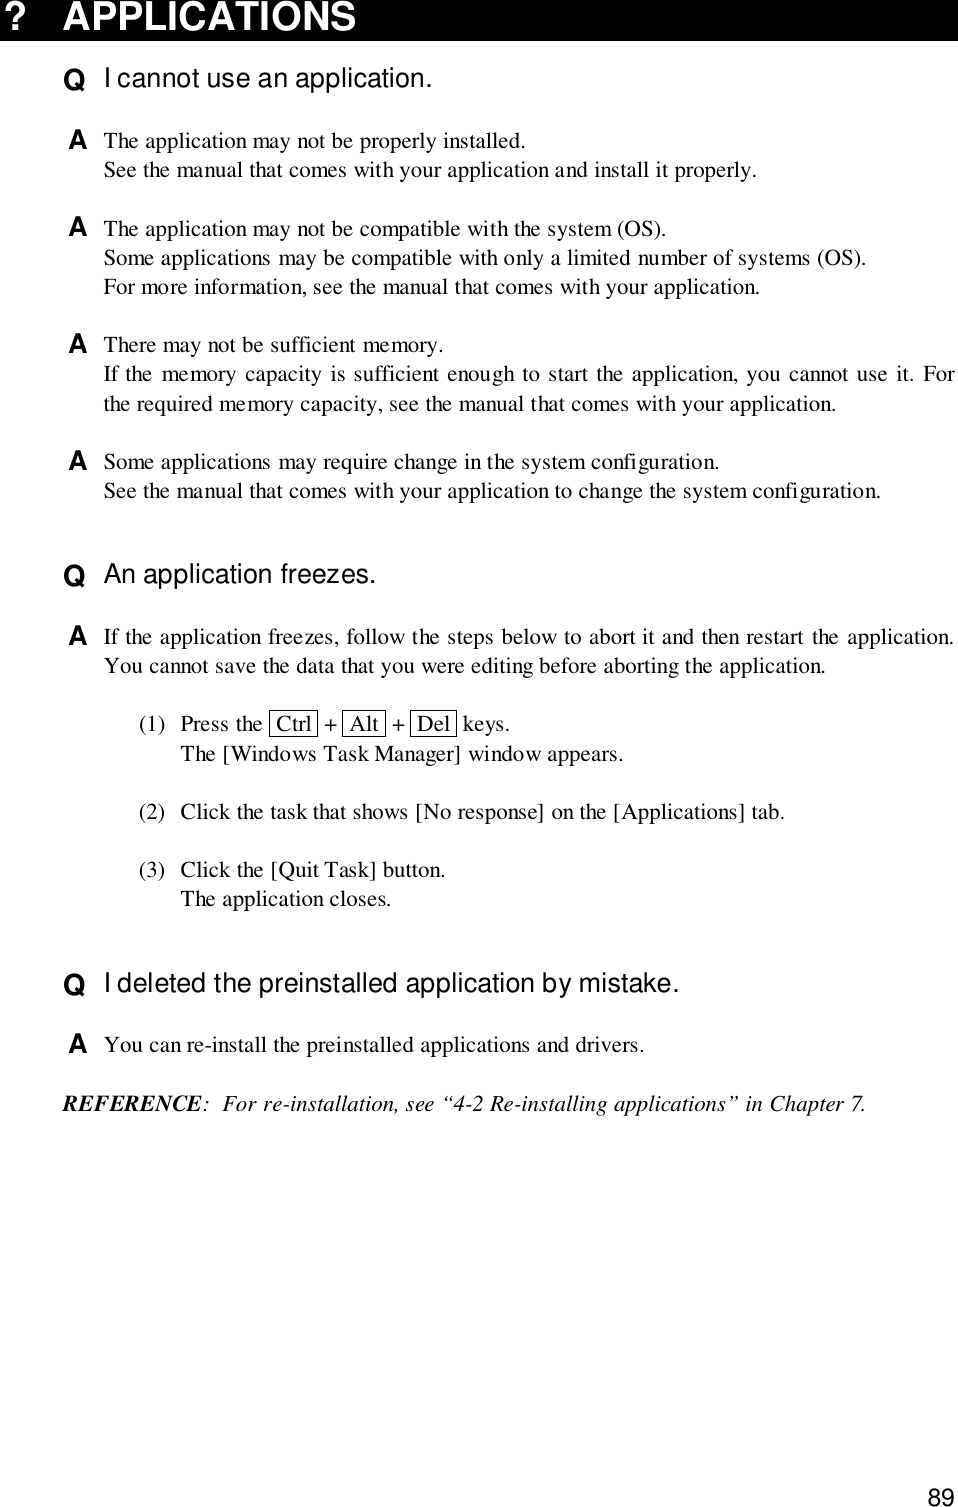 89? APPLICATIONSQ  I cannot use an application.A  The application may not be properly installed.See the manual that comes with your application and install it properly.A  The application may not be compatible with the system (OS).Some applications may be compatible with only a limited number of systems (OS).For more information, see the manual that comes with your application.A  There may not be sufficient memory.If the memory capacity is sufficient enough to start the application, you cannot use it. Forthe required memory capacity, see the manual that comes with your application.A  Some applications may require change in the system configuration.See the manual that comes with your application to change the system configuration.Q  An application freezes.A  If the application freezes, follow the steps below to abort it and then restart the application.You cannot save the data that you were editing before aborting the application.(1) Press the  Ctrl  +  Alt  +  Del  keys.The [Windows Task Manager] window appears.(2) Click the task that shows [No response] on the [Applications] tab.(3) Click the [Quit Task] button.The application closes.Q  I deleted the preinstalled application by mistake.A  You can re-install the preinstalled applications and drivers.REFERENCE: For re-installation, see “4-2 Re-installing applications” in Chapter 7.